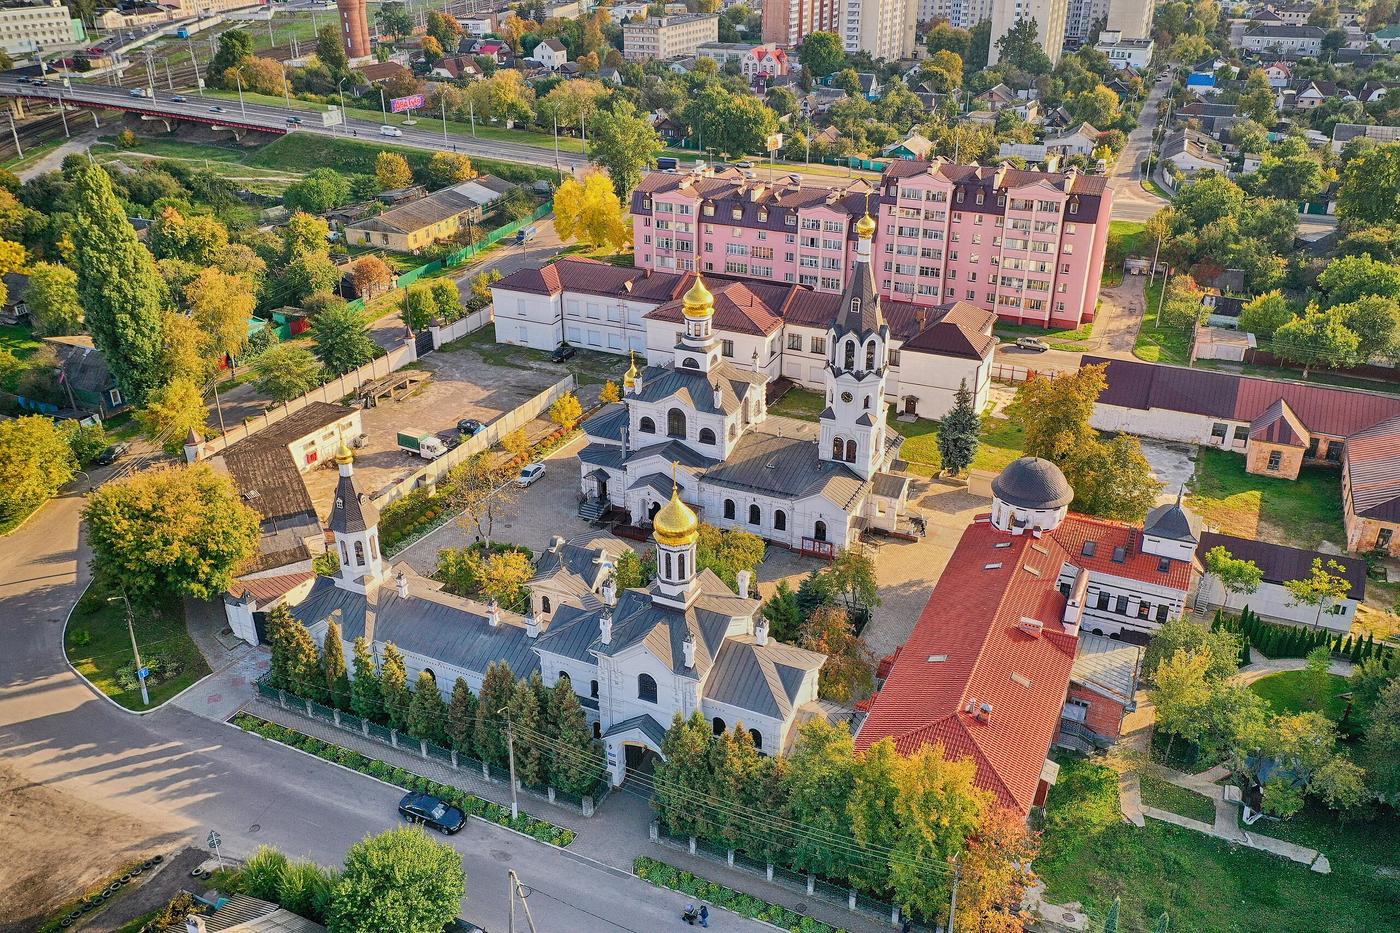 Gomel: Pure history and nature